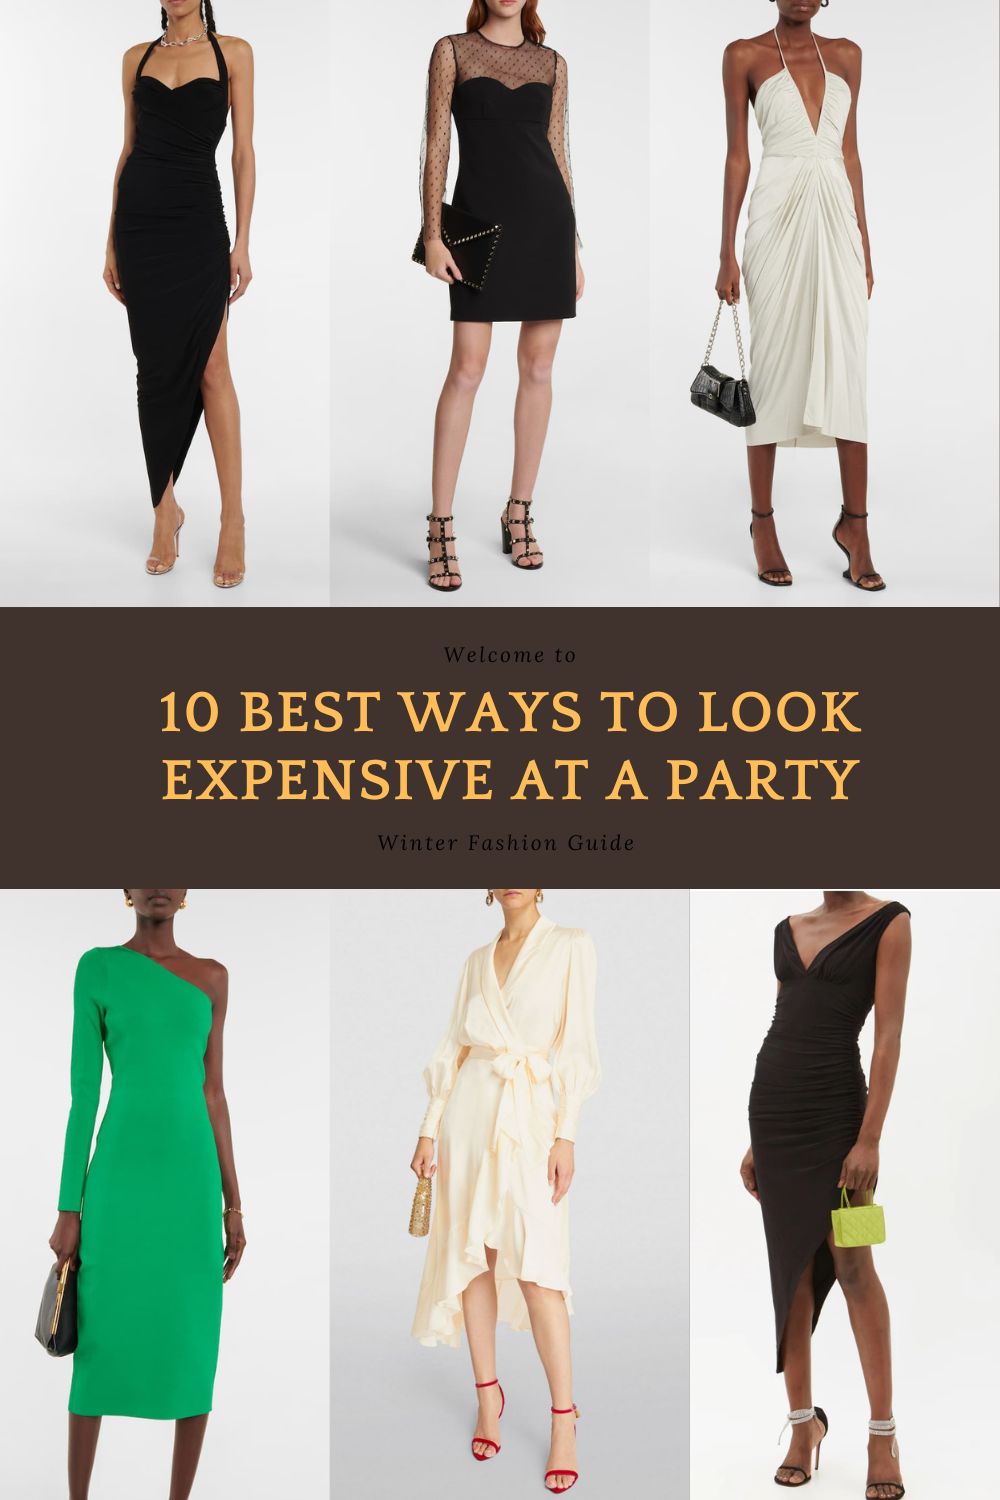 10 Best Ways To Look Expensive At A Party Dresses | Fashion Guide